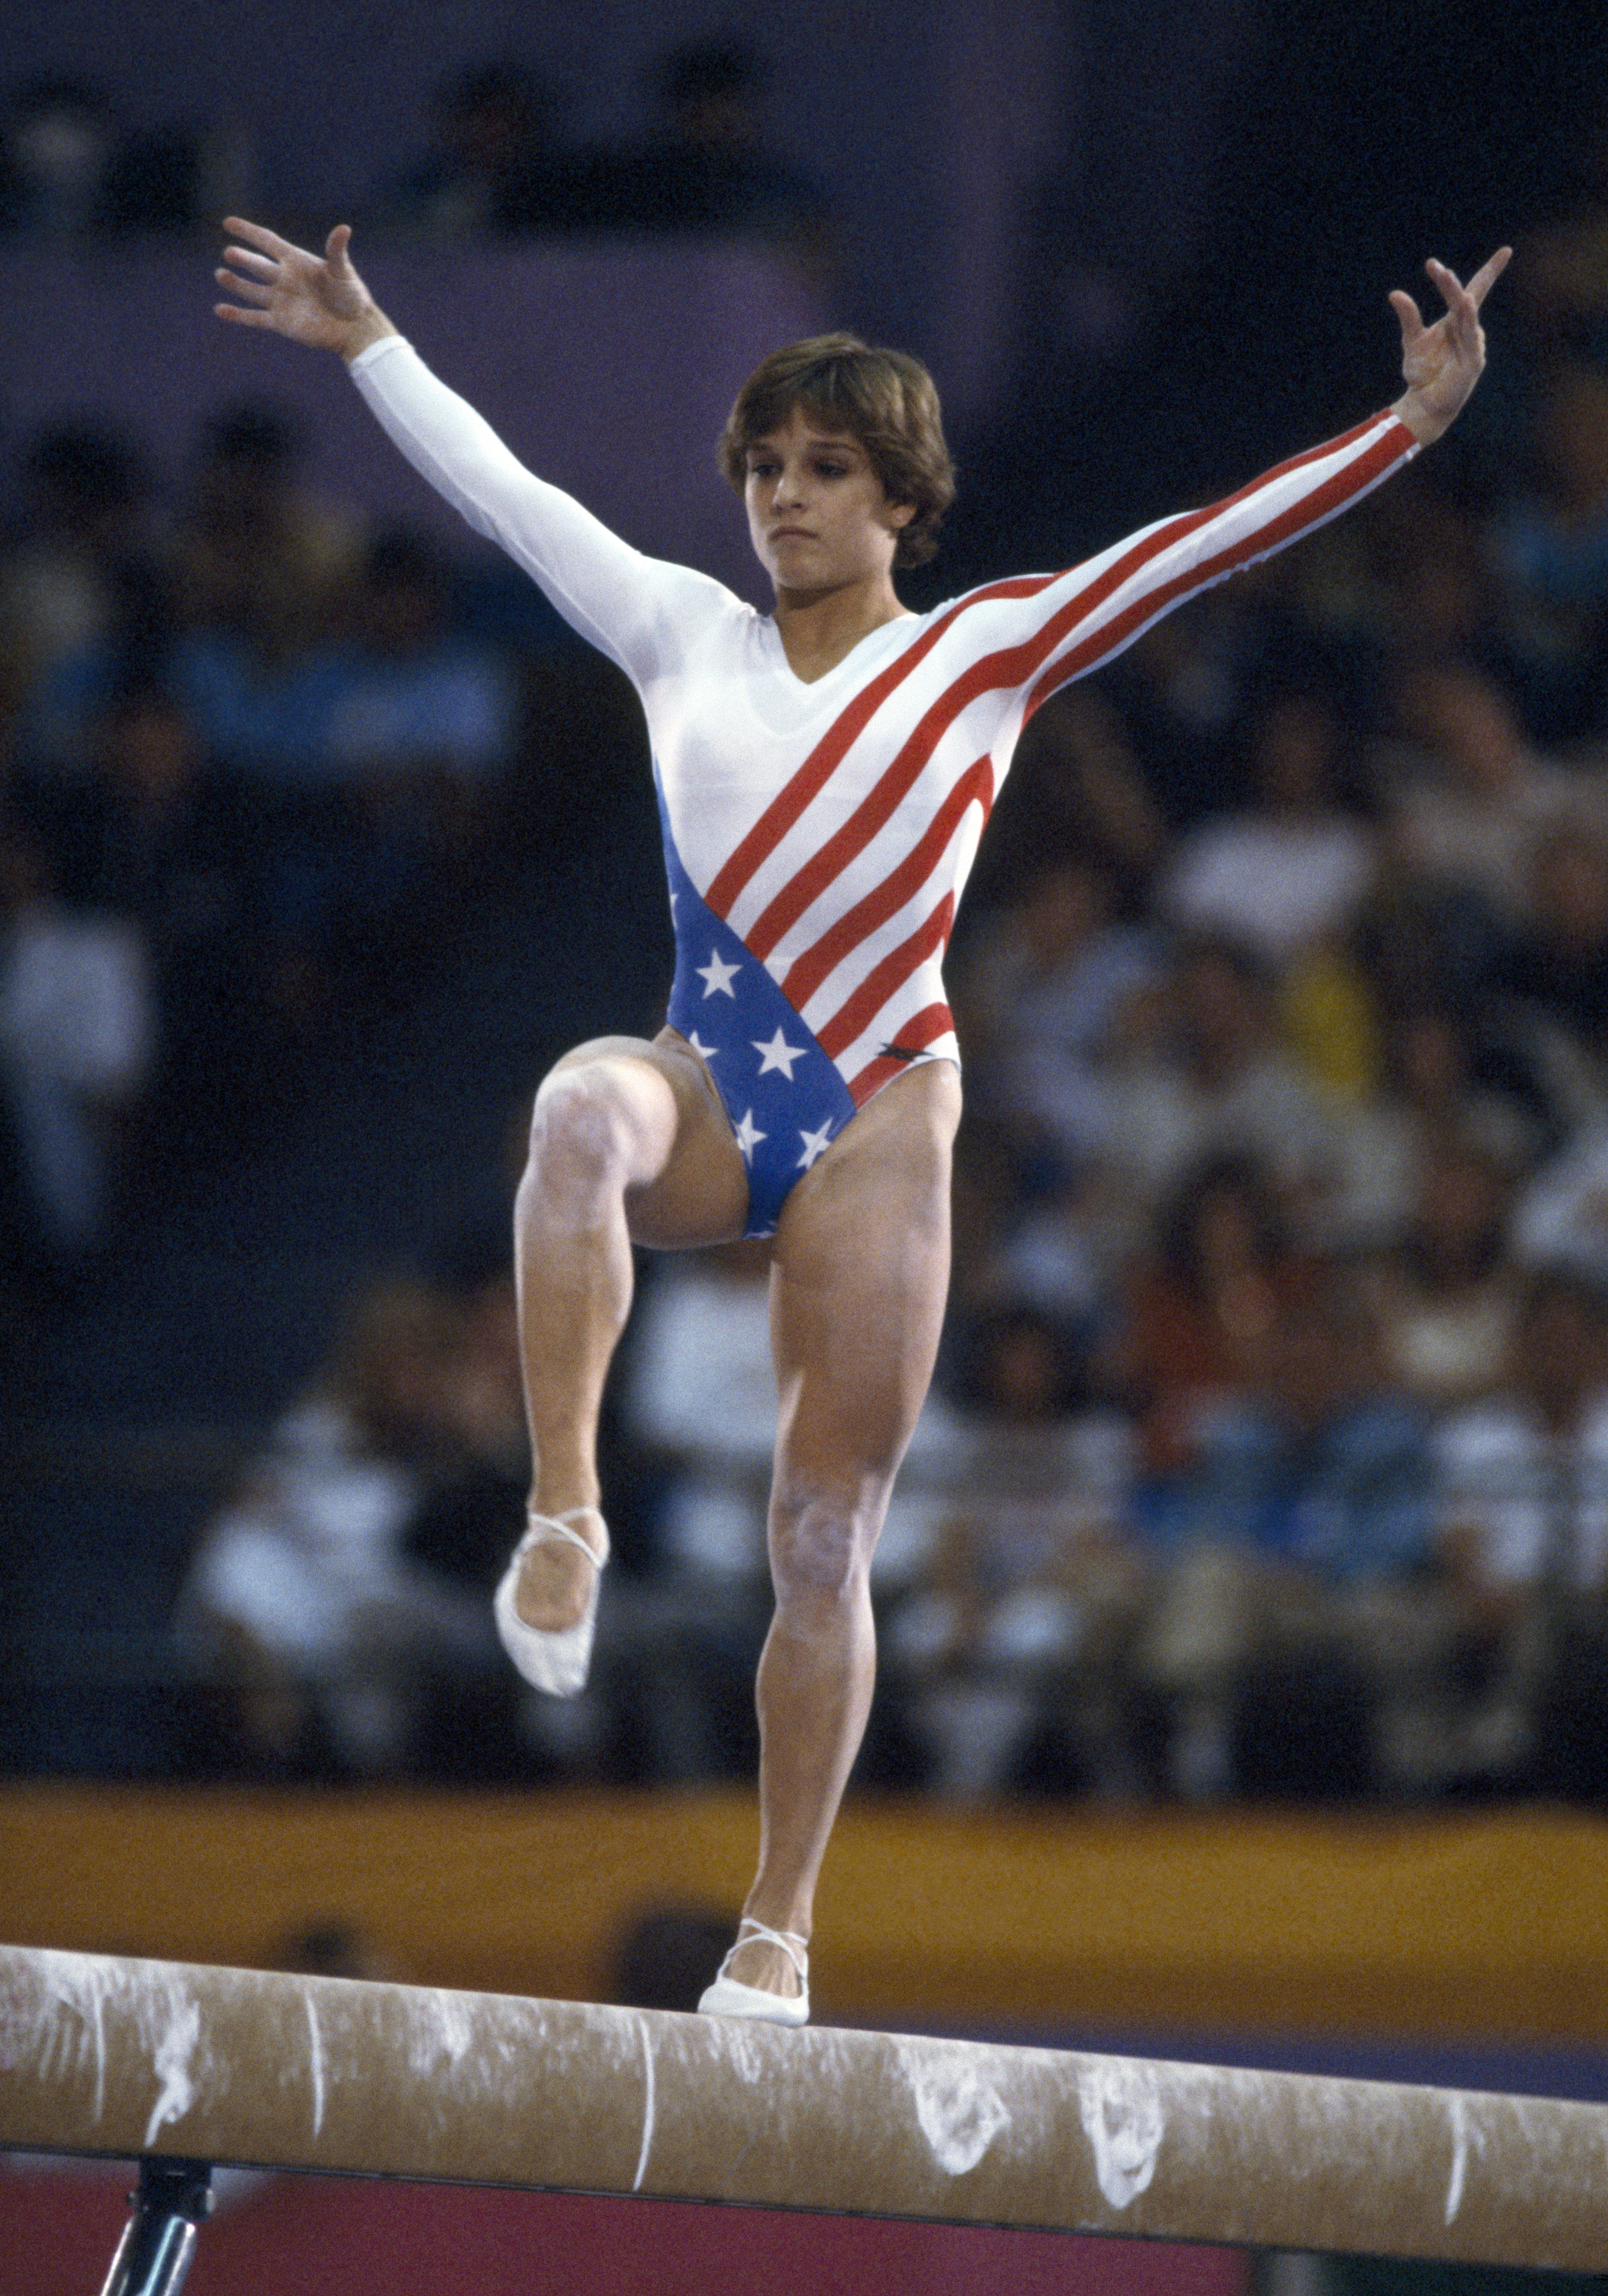 Mary Lou Retton competes on the balance beam during competition in the Women's artistic individual all-around event at the 1984 Summer Olympics, inside the Pauley Pavilion, in Los Angeles, in July 1984.